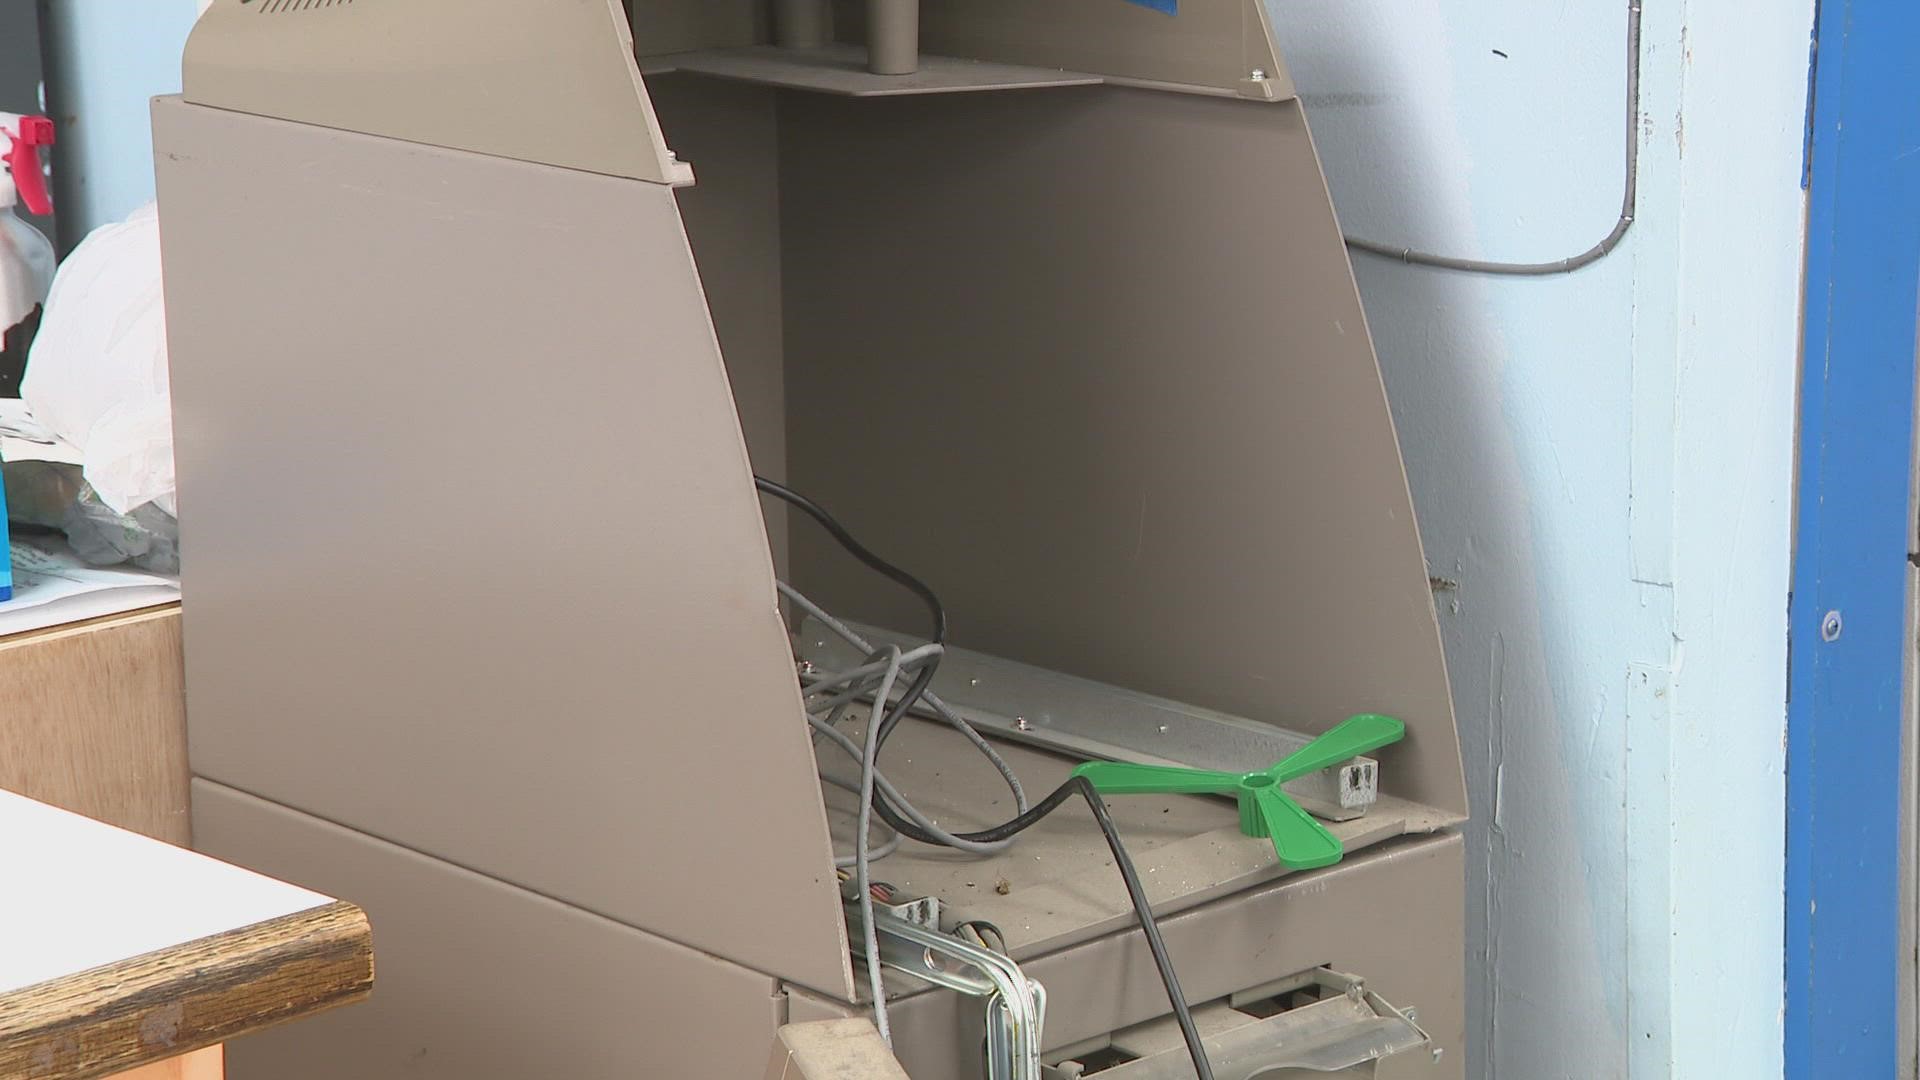 The majority of them were left with severe damage to their ATM machines. Two more businesses in South St. Louis were broken into overnight on Tuesday.